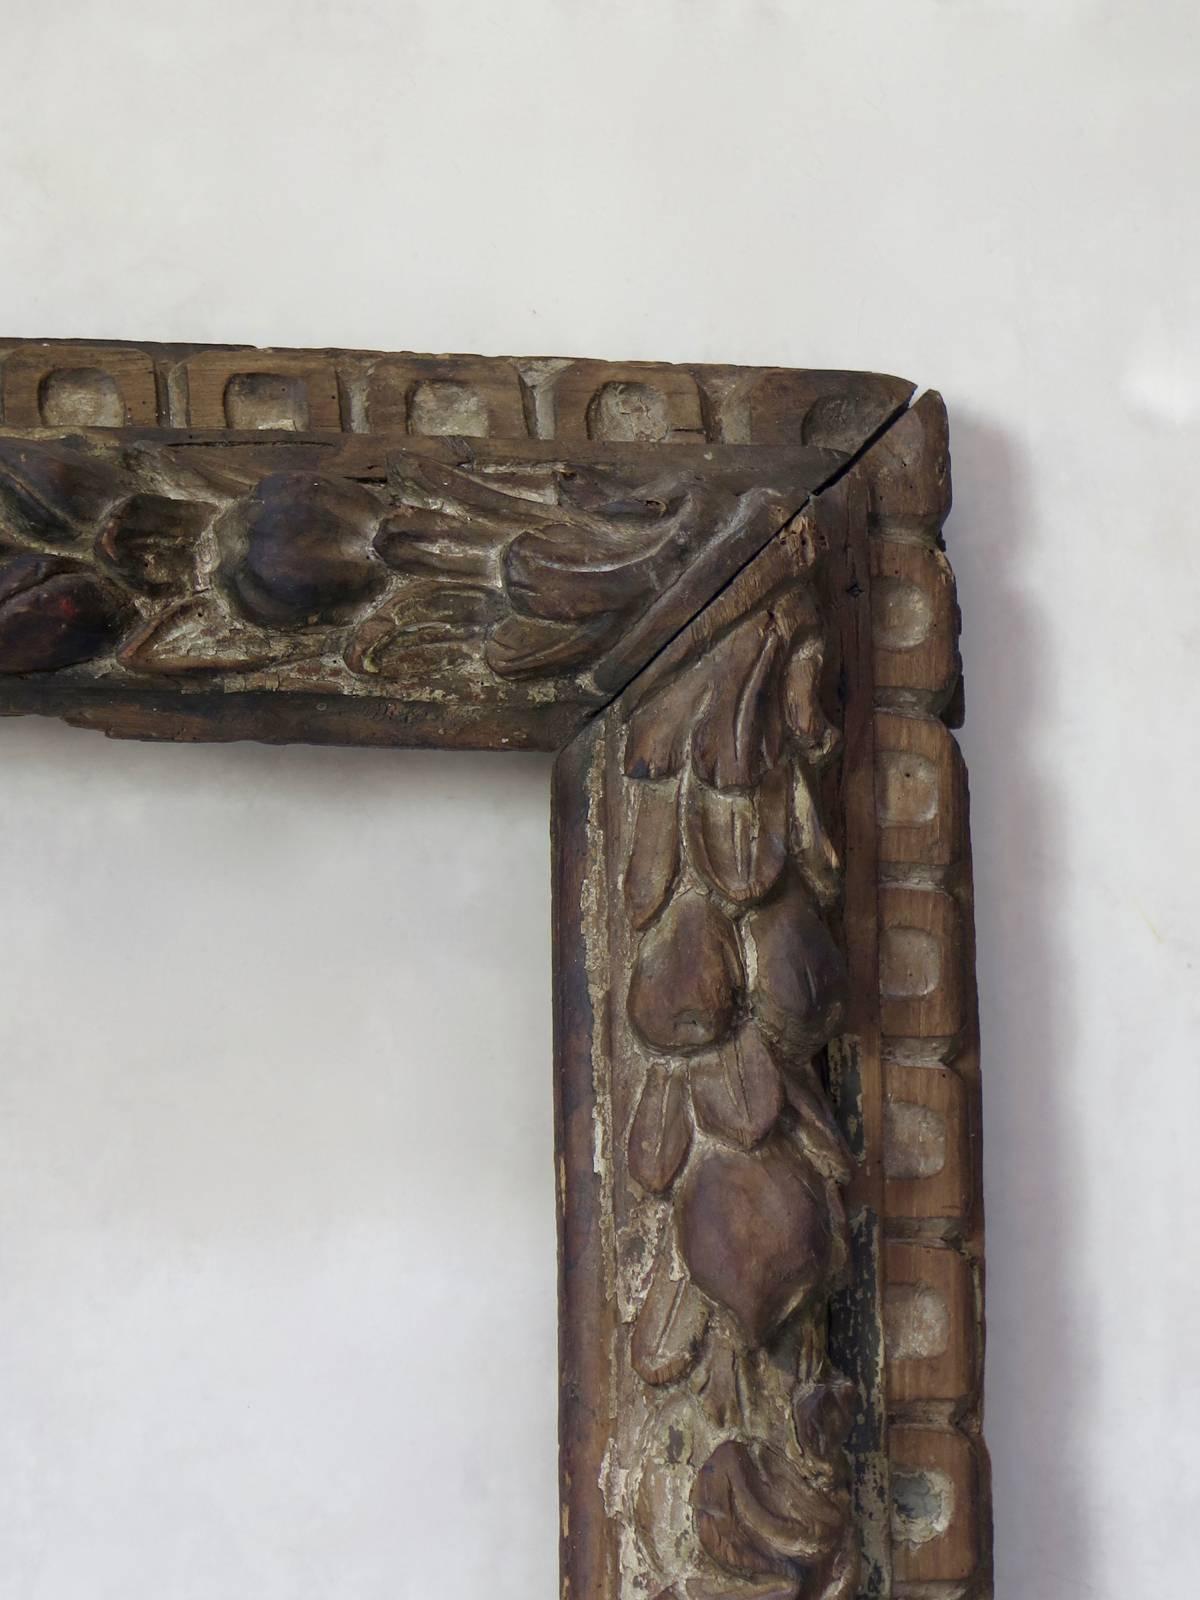 Rare and sumptuous carved wood frame, decorated with acanthus leaves, fruit and leaves (olive or laurel?). The original, polychrome pain gold and green has worn off in places.